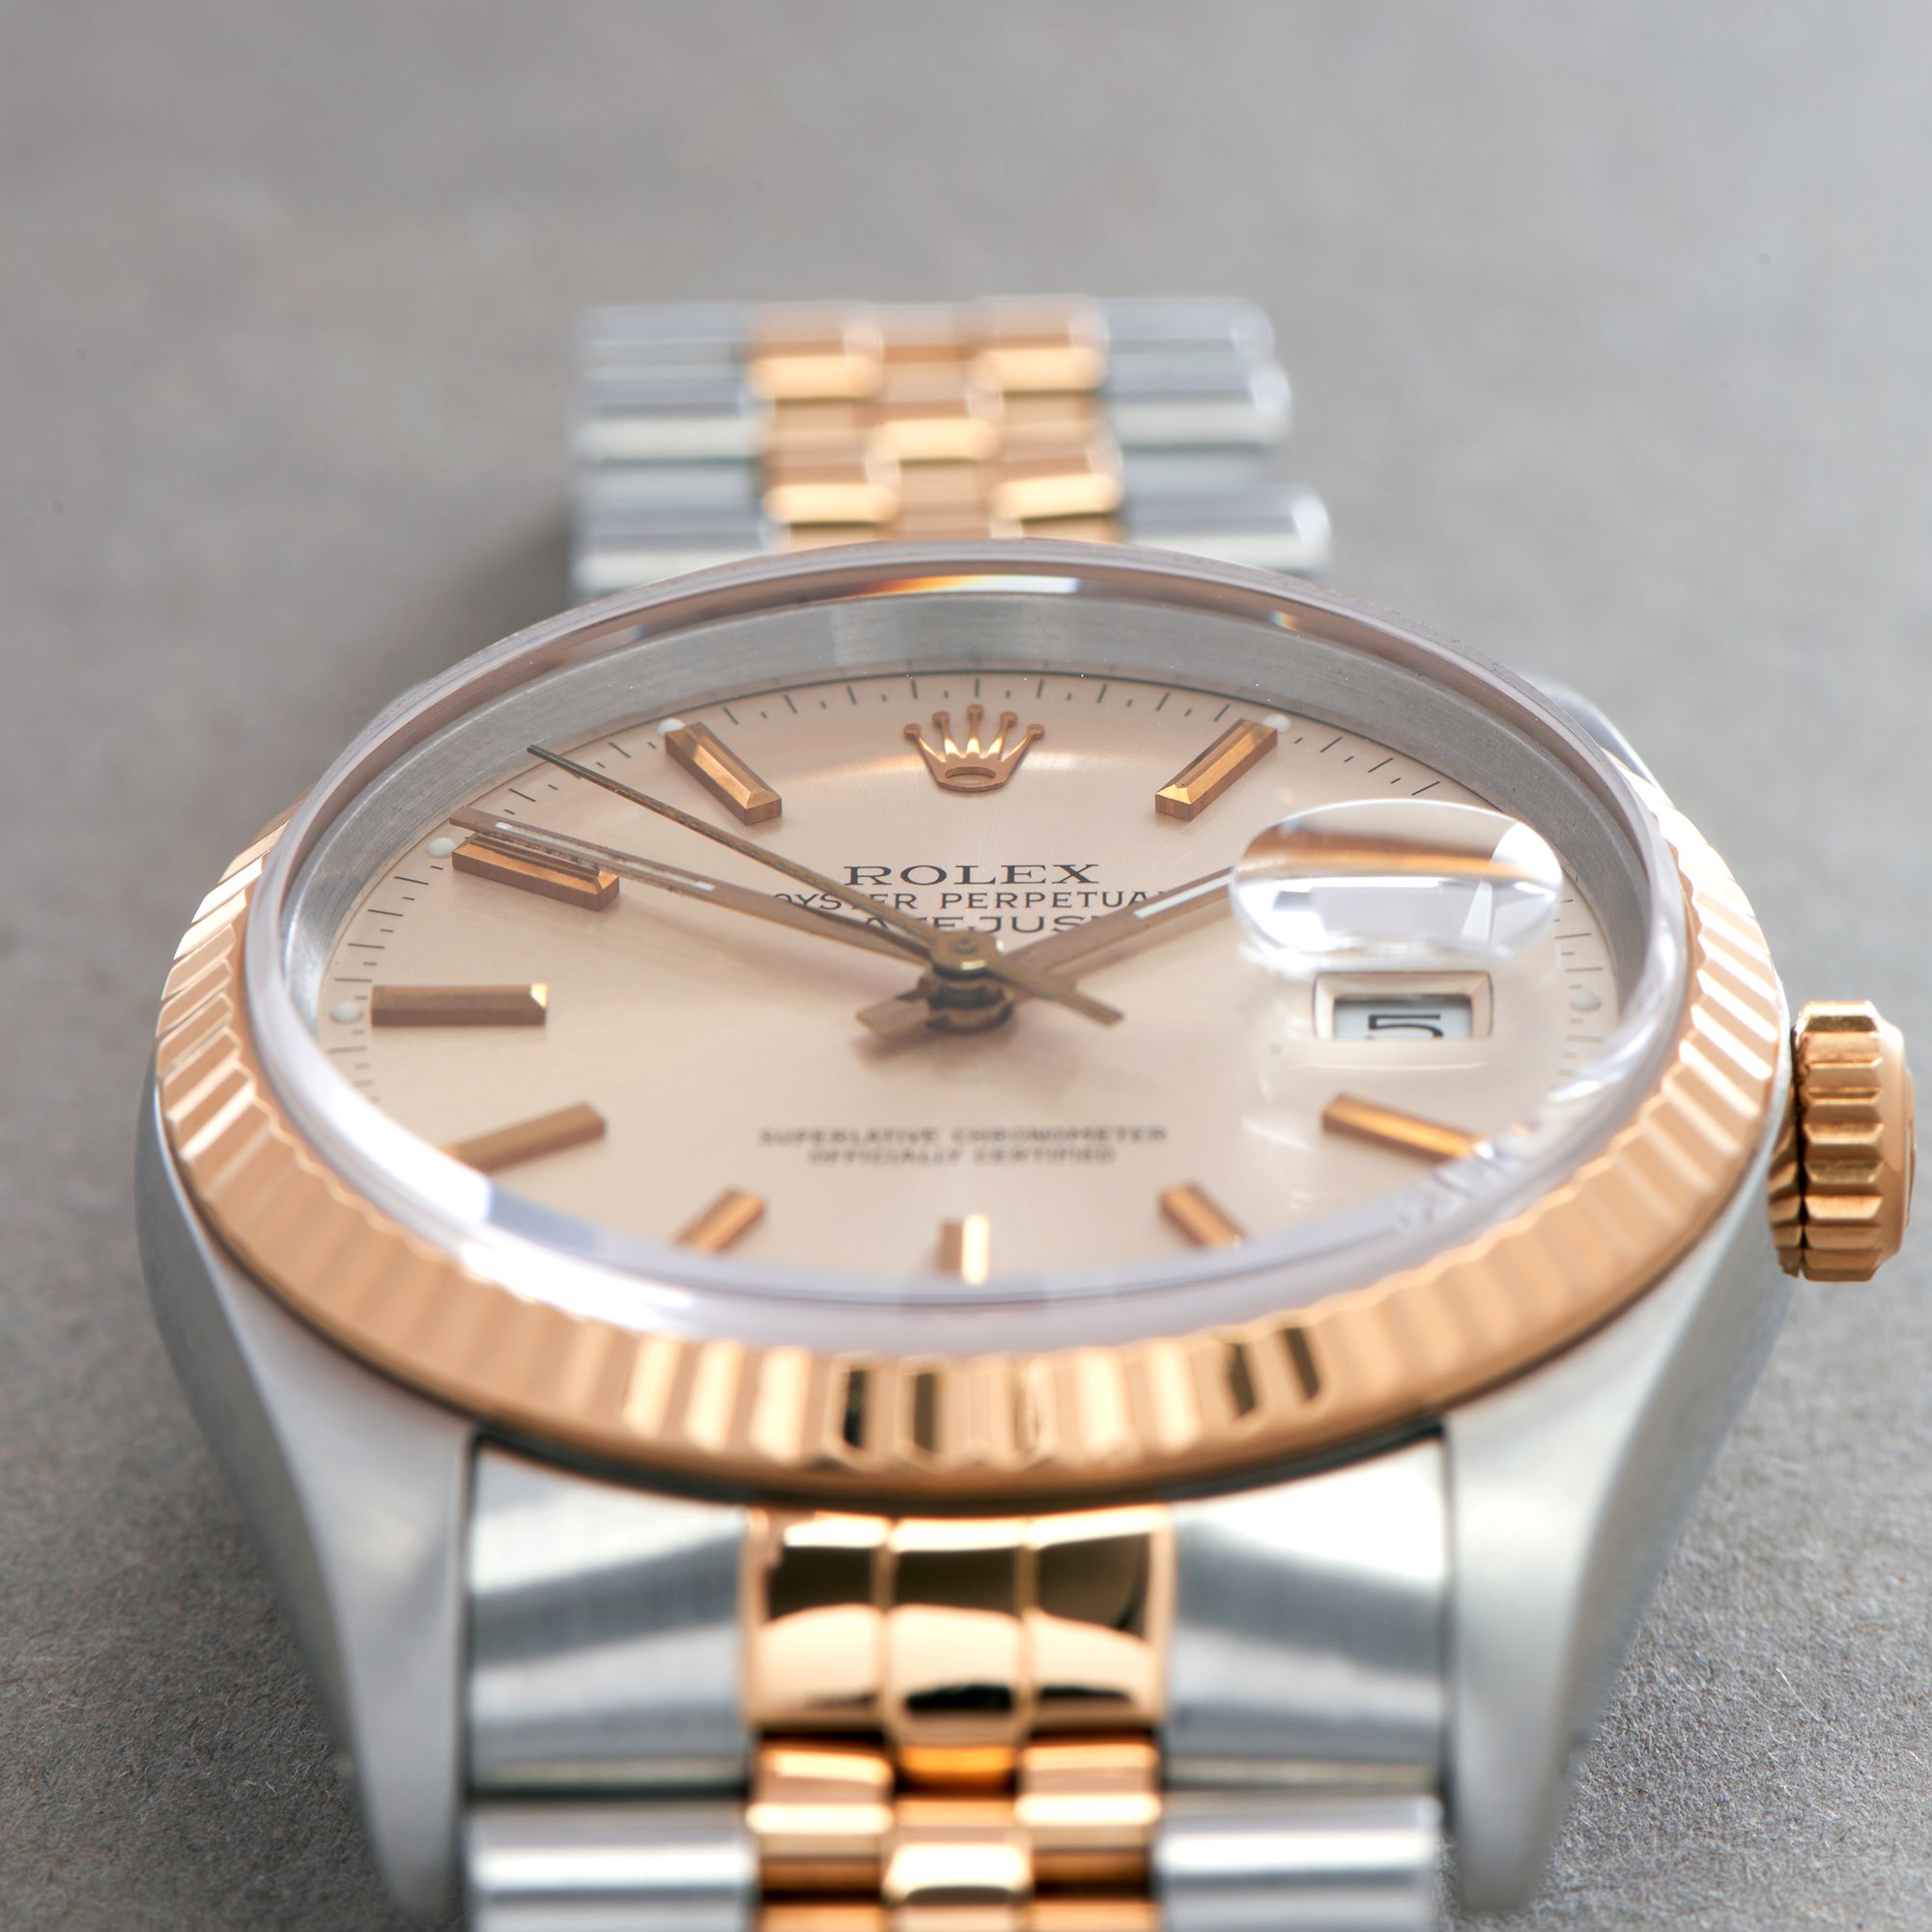 Rolex Datejust 18K Yellow Gold & Stainless Steel 16233